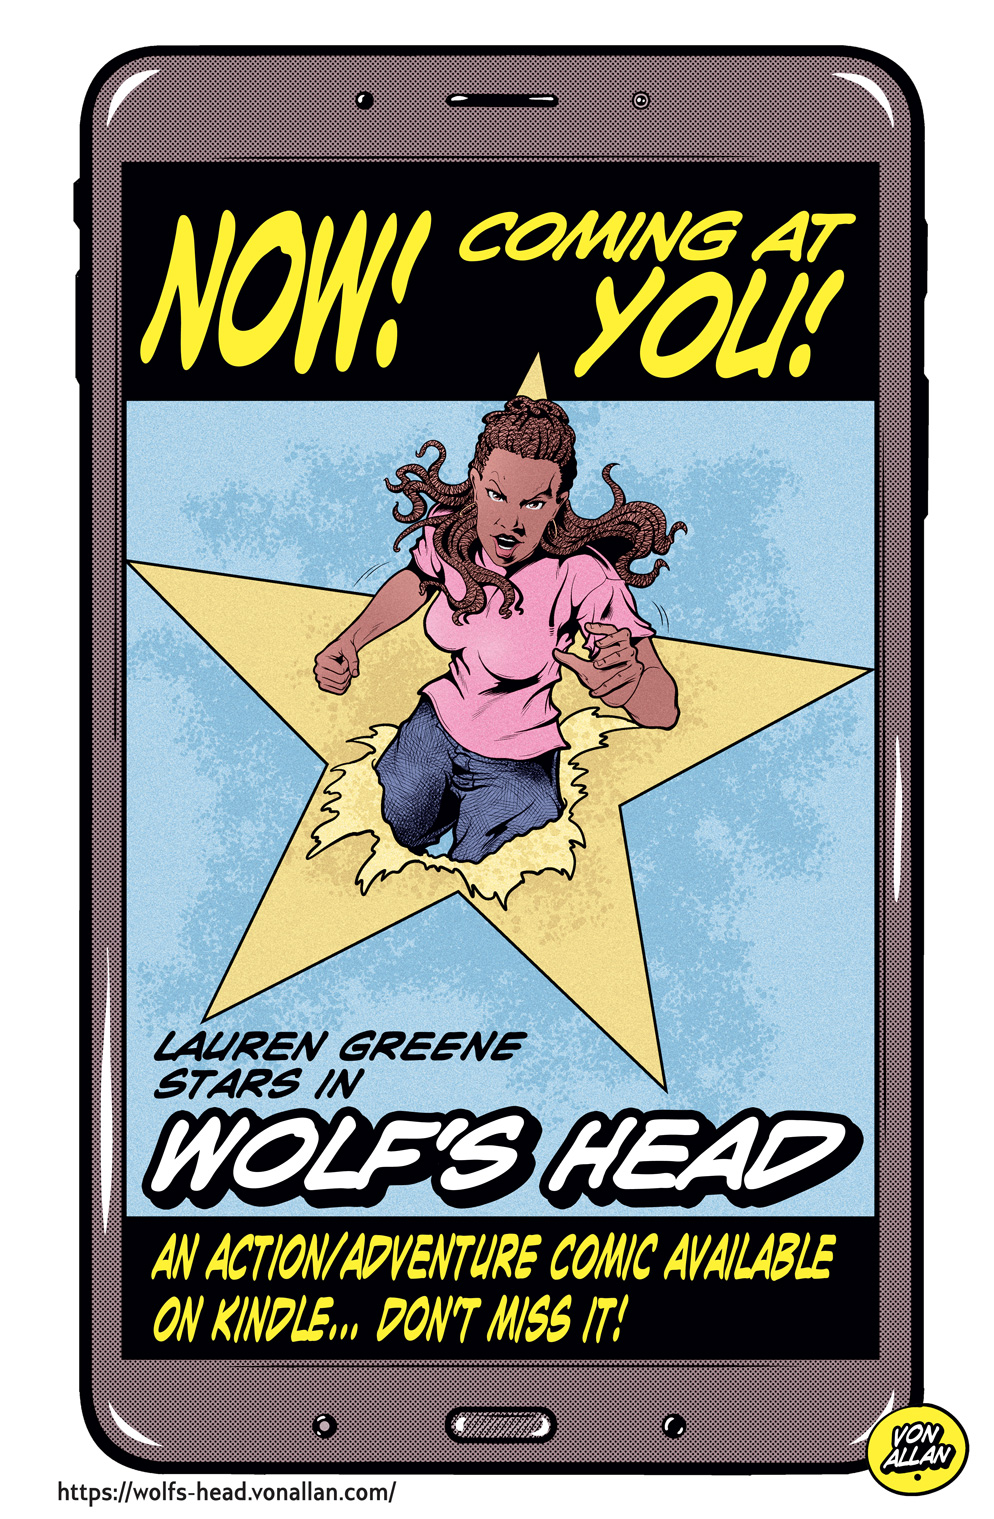 Teaser image featuring Lauren Greene from Wolf's Head announcing the release of the series